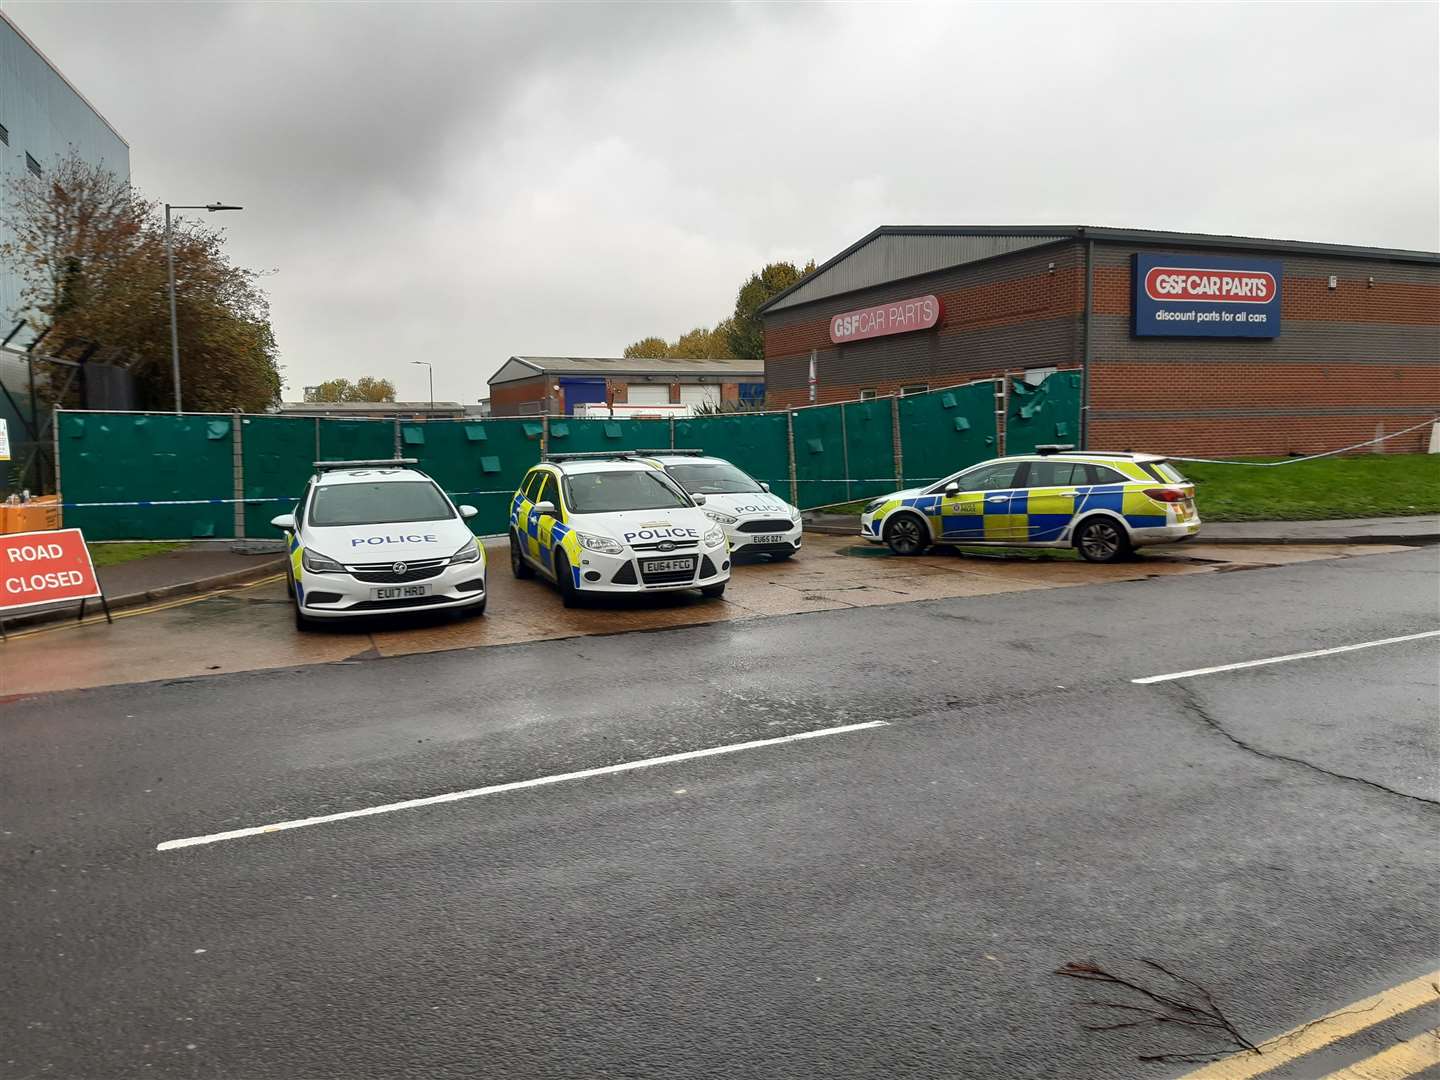 A police cordon remains in place at the industrial estate in Eastern Avenue this afternoon while investigations are carried out. (20075537)